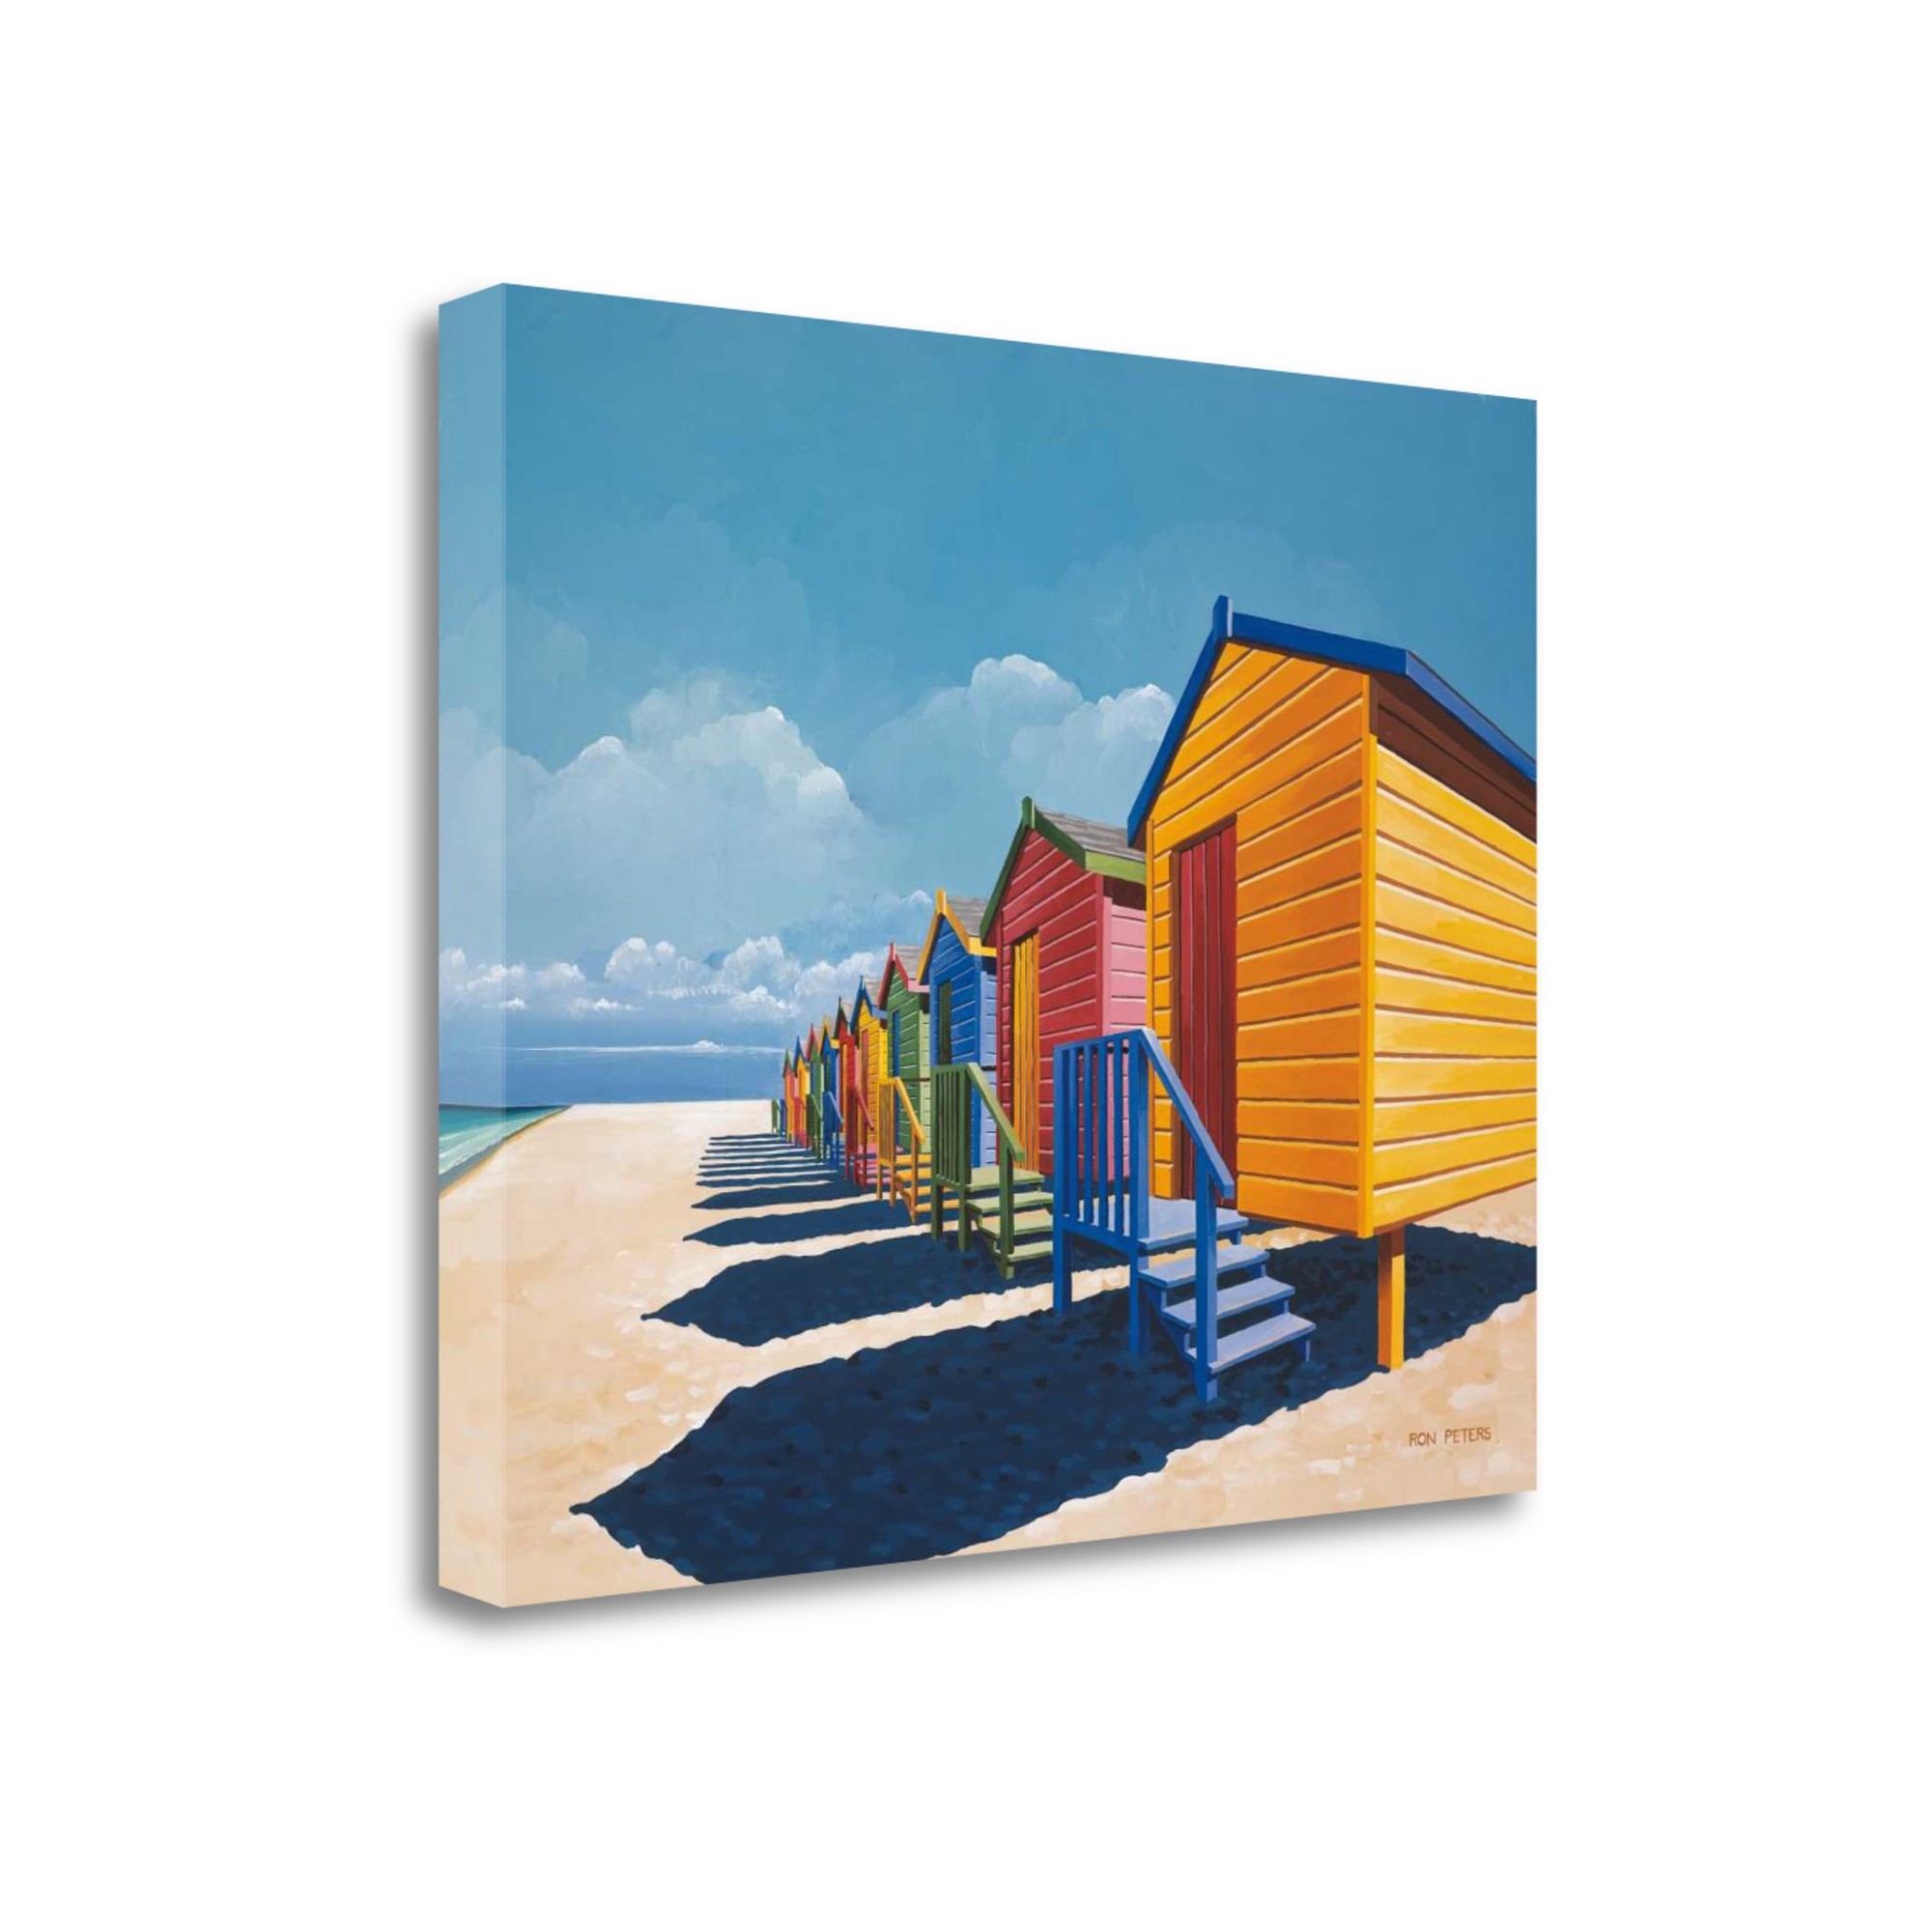 43" Bright Beach Huts Giclee Print on Gallery Wrap Canvas Wall Art